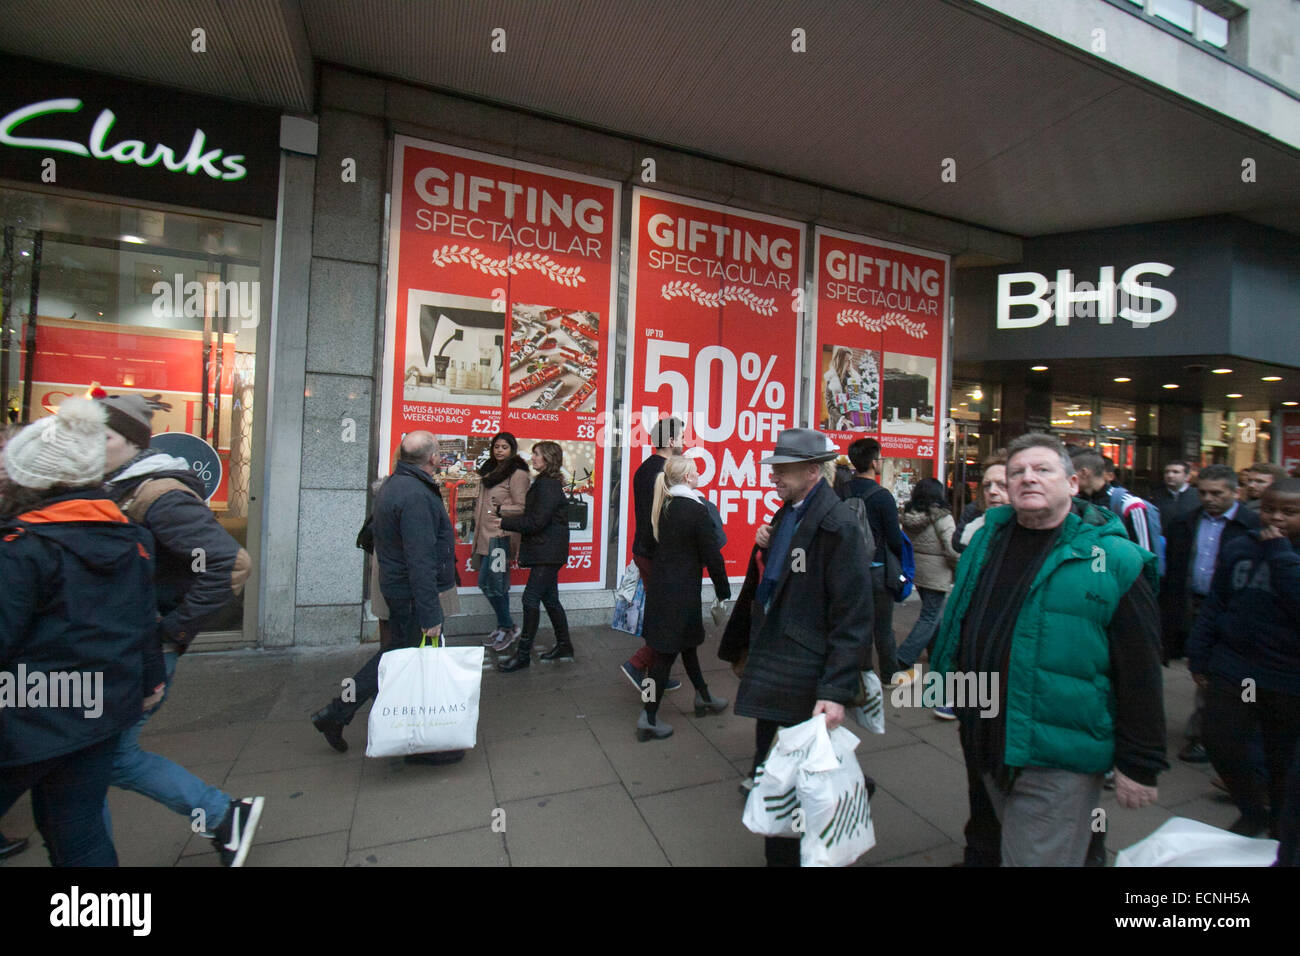 London,UK. 17th December 2014. Oxford street is busy with Christmas shoppers with a week left until the Christmas holidays Stock Photo